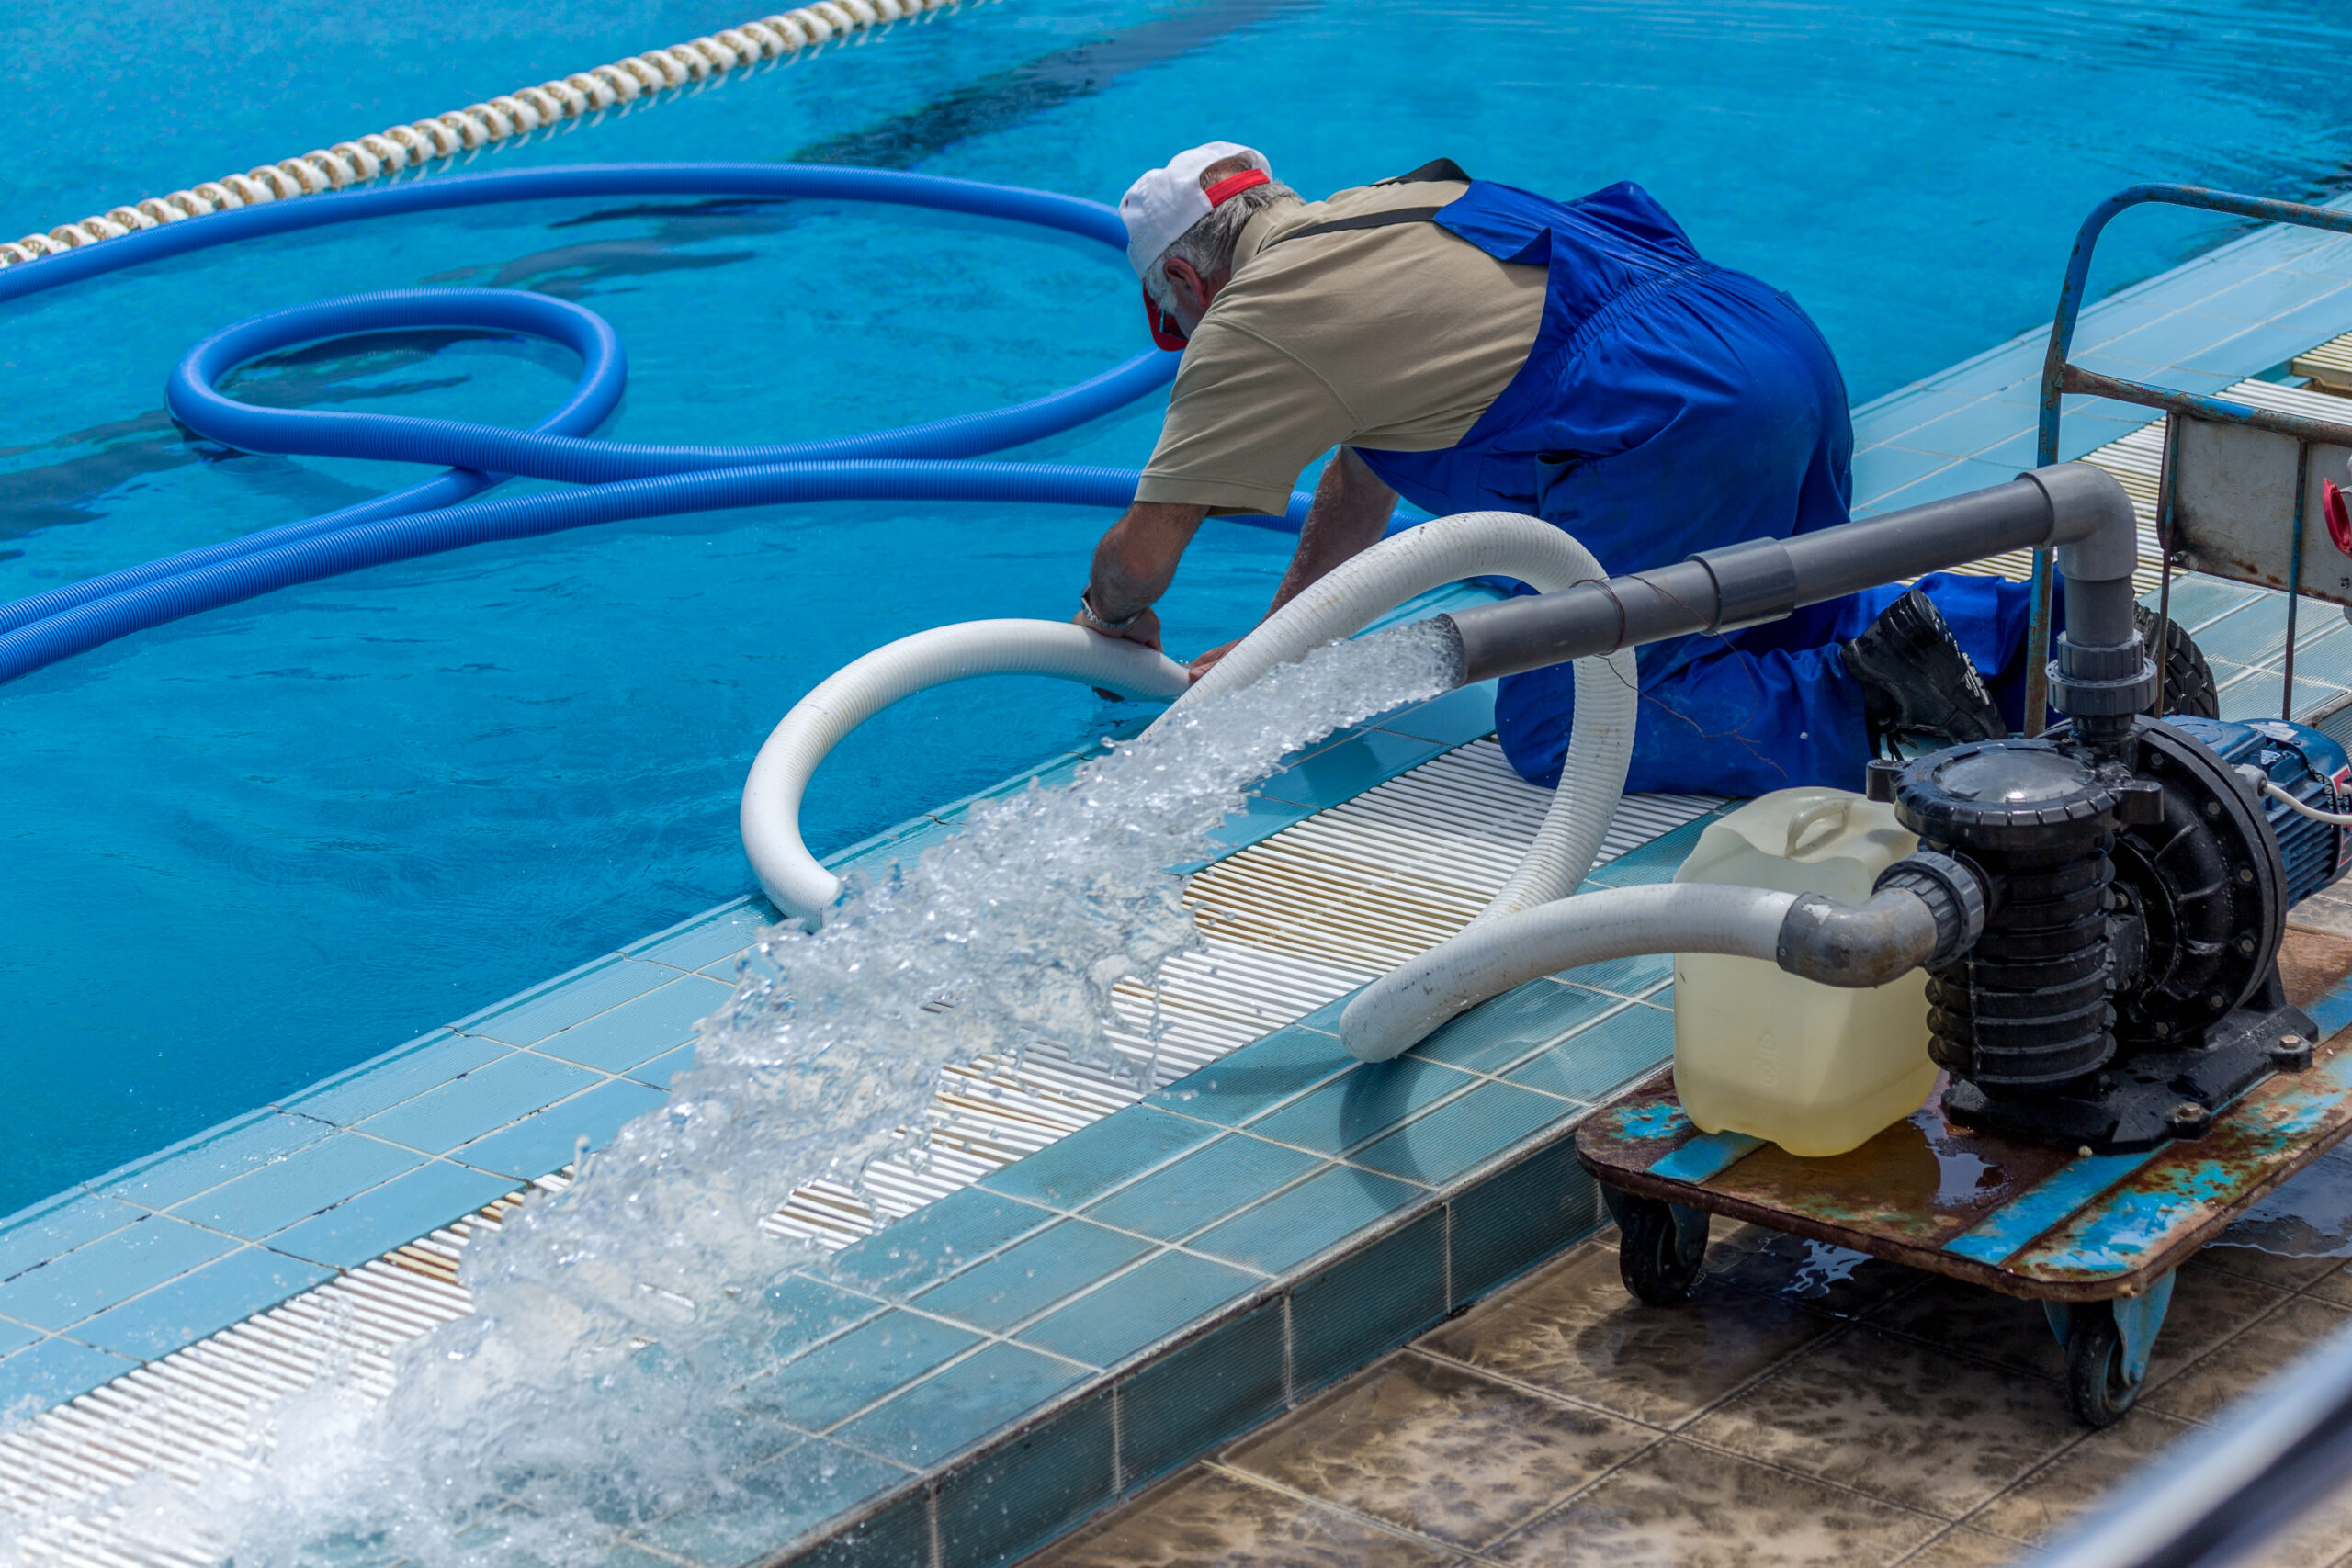 A man operating a pool filter machine, ensuring the pool water remains clean and clear.